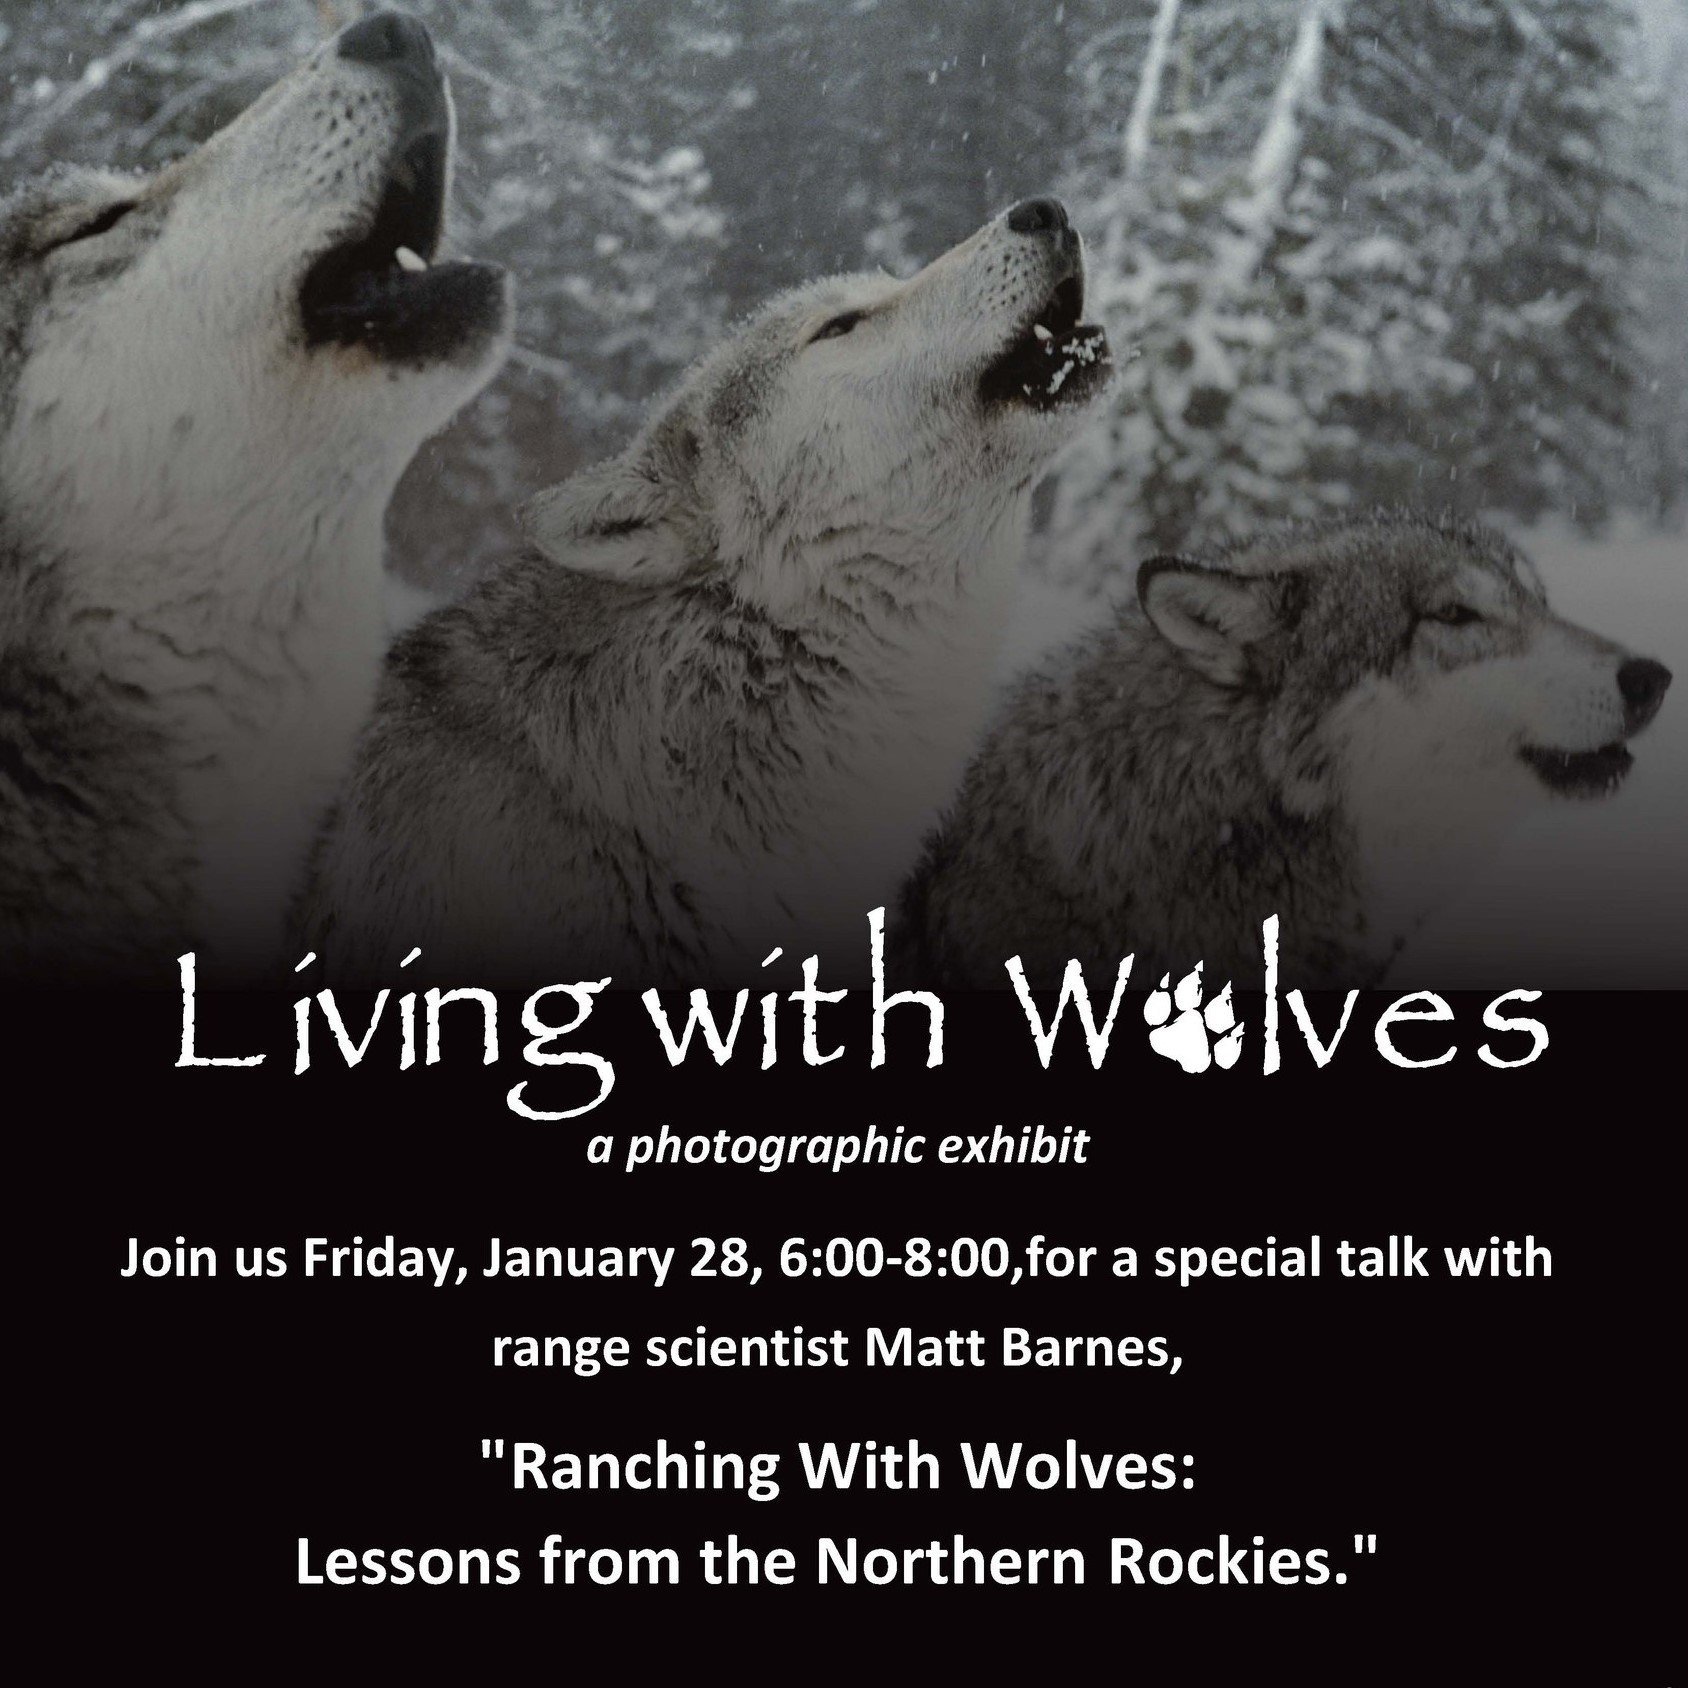 living-with-wolves-photographic-exhibit.jpg